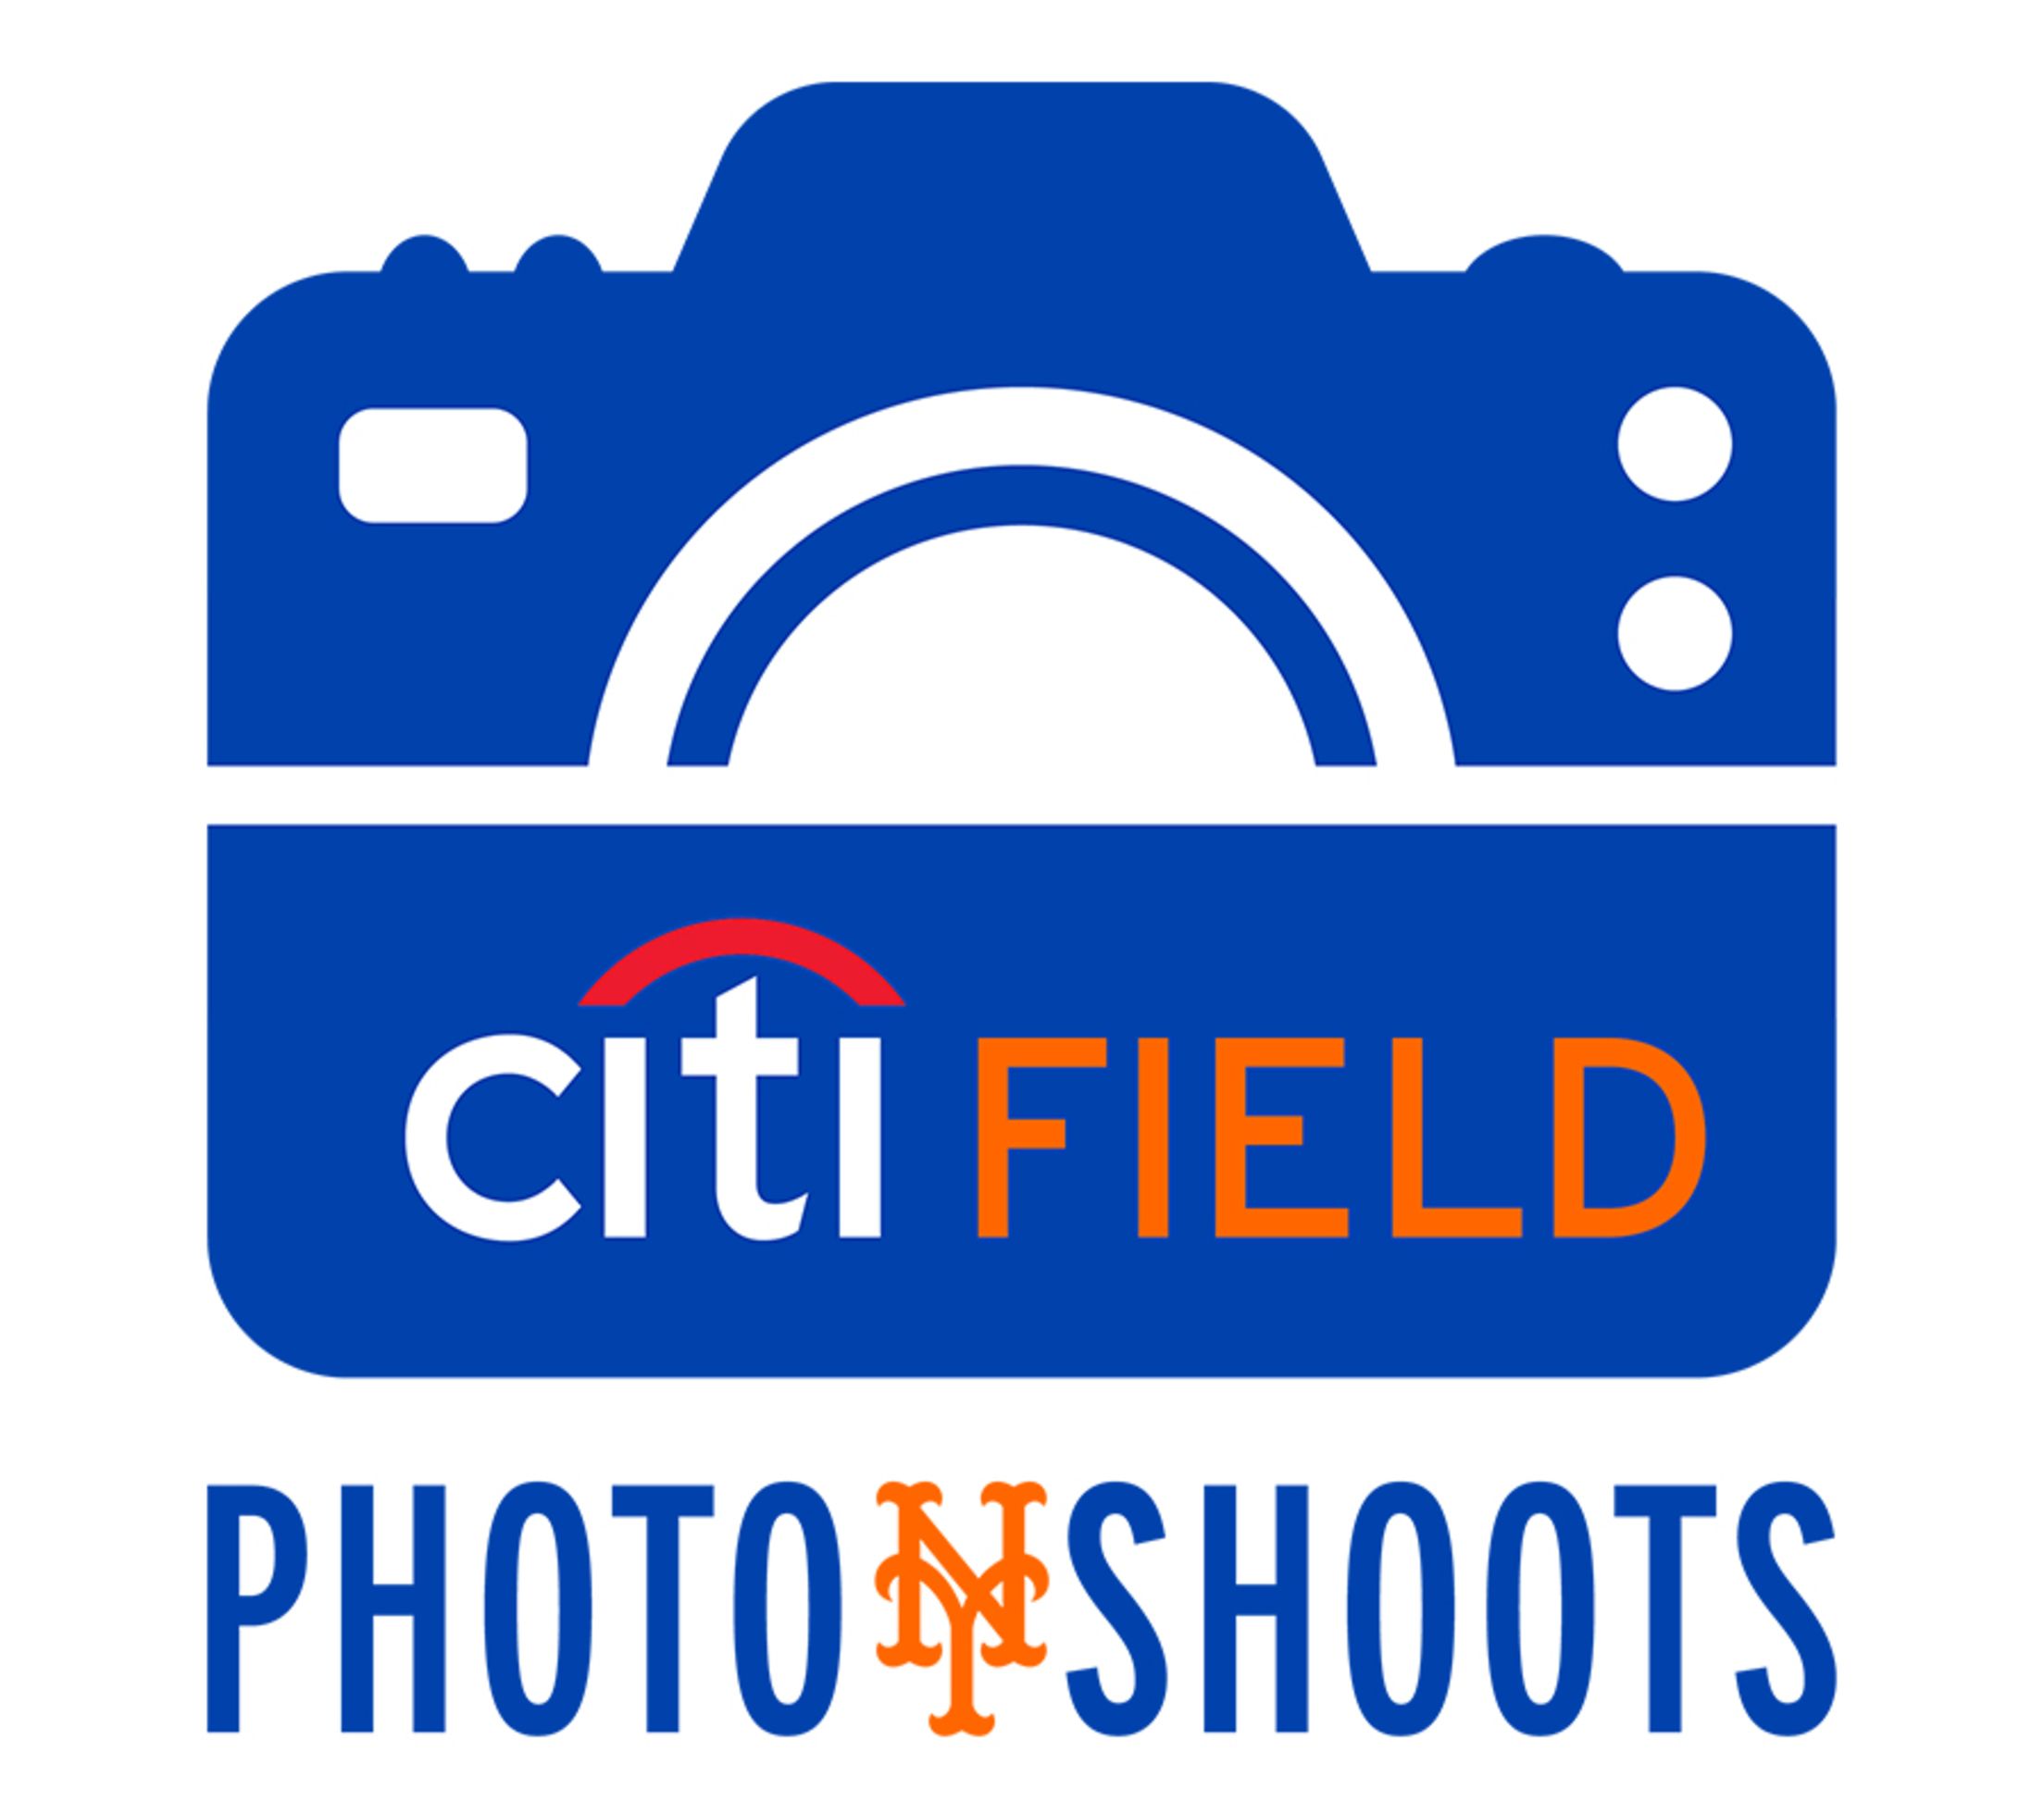 The Team Store at @citifield is open today from 10AM-5PM. Come